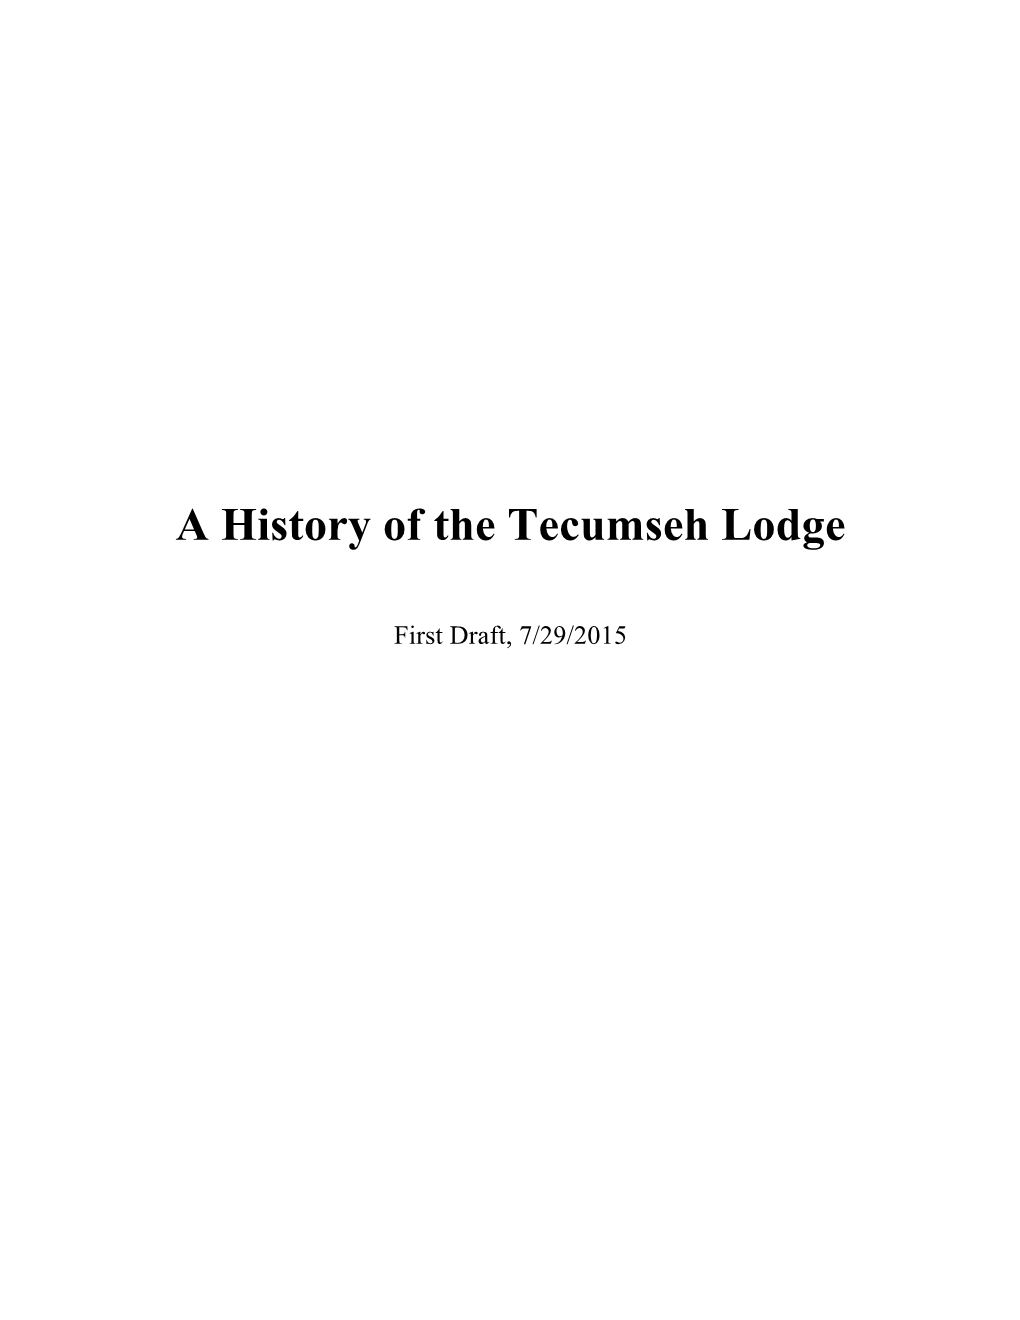 A History of the Tecumseh Lodge